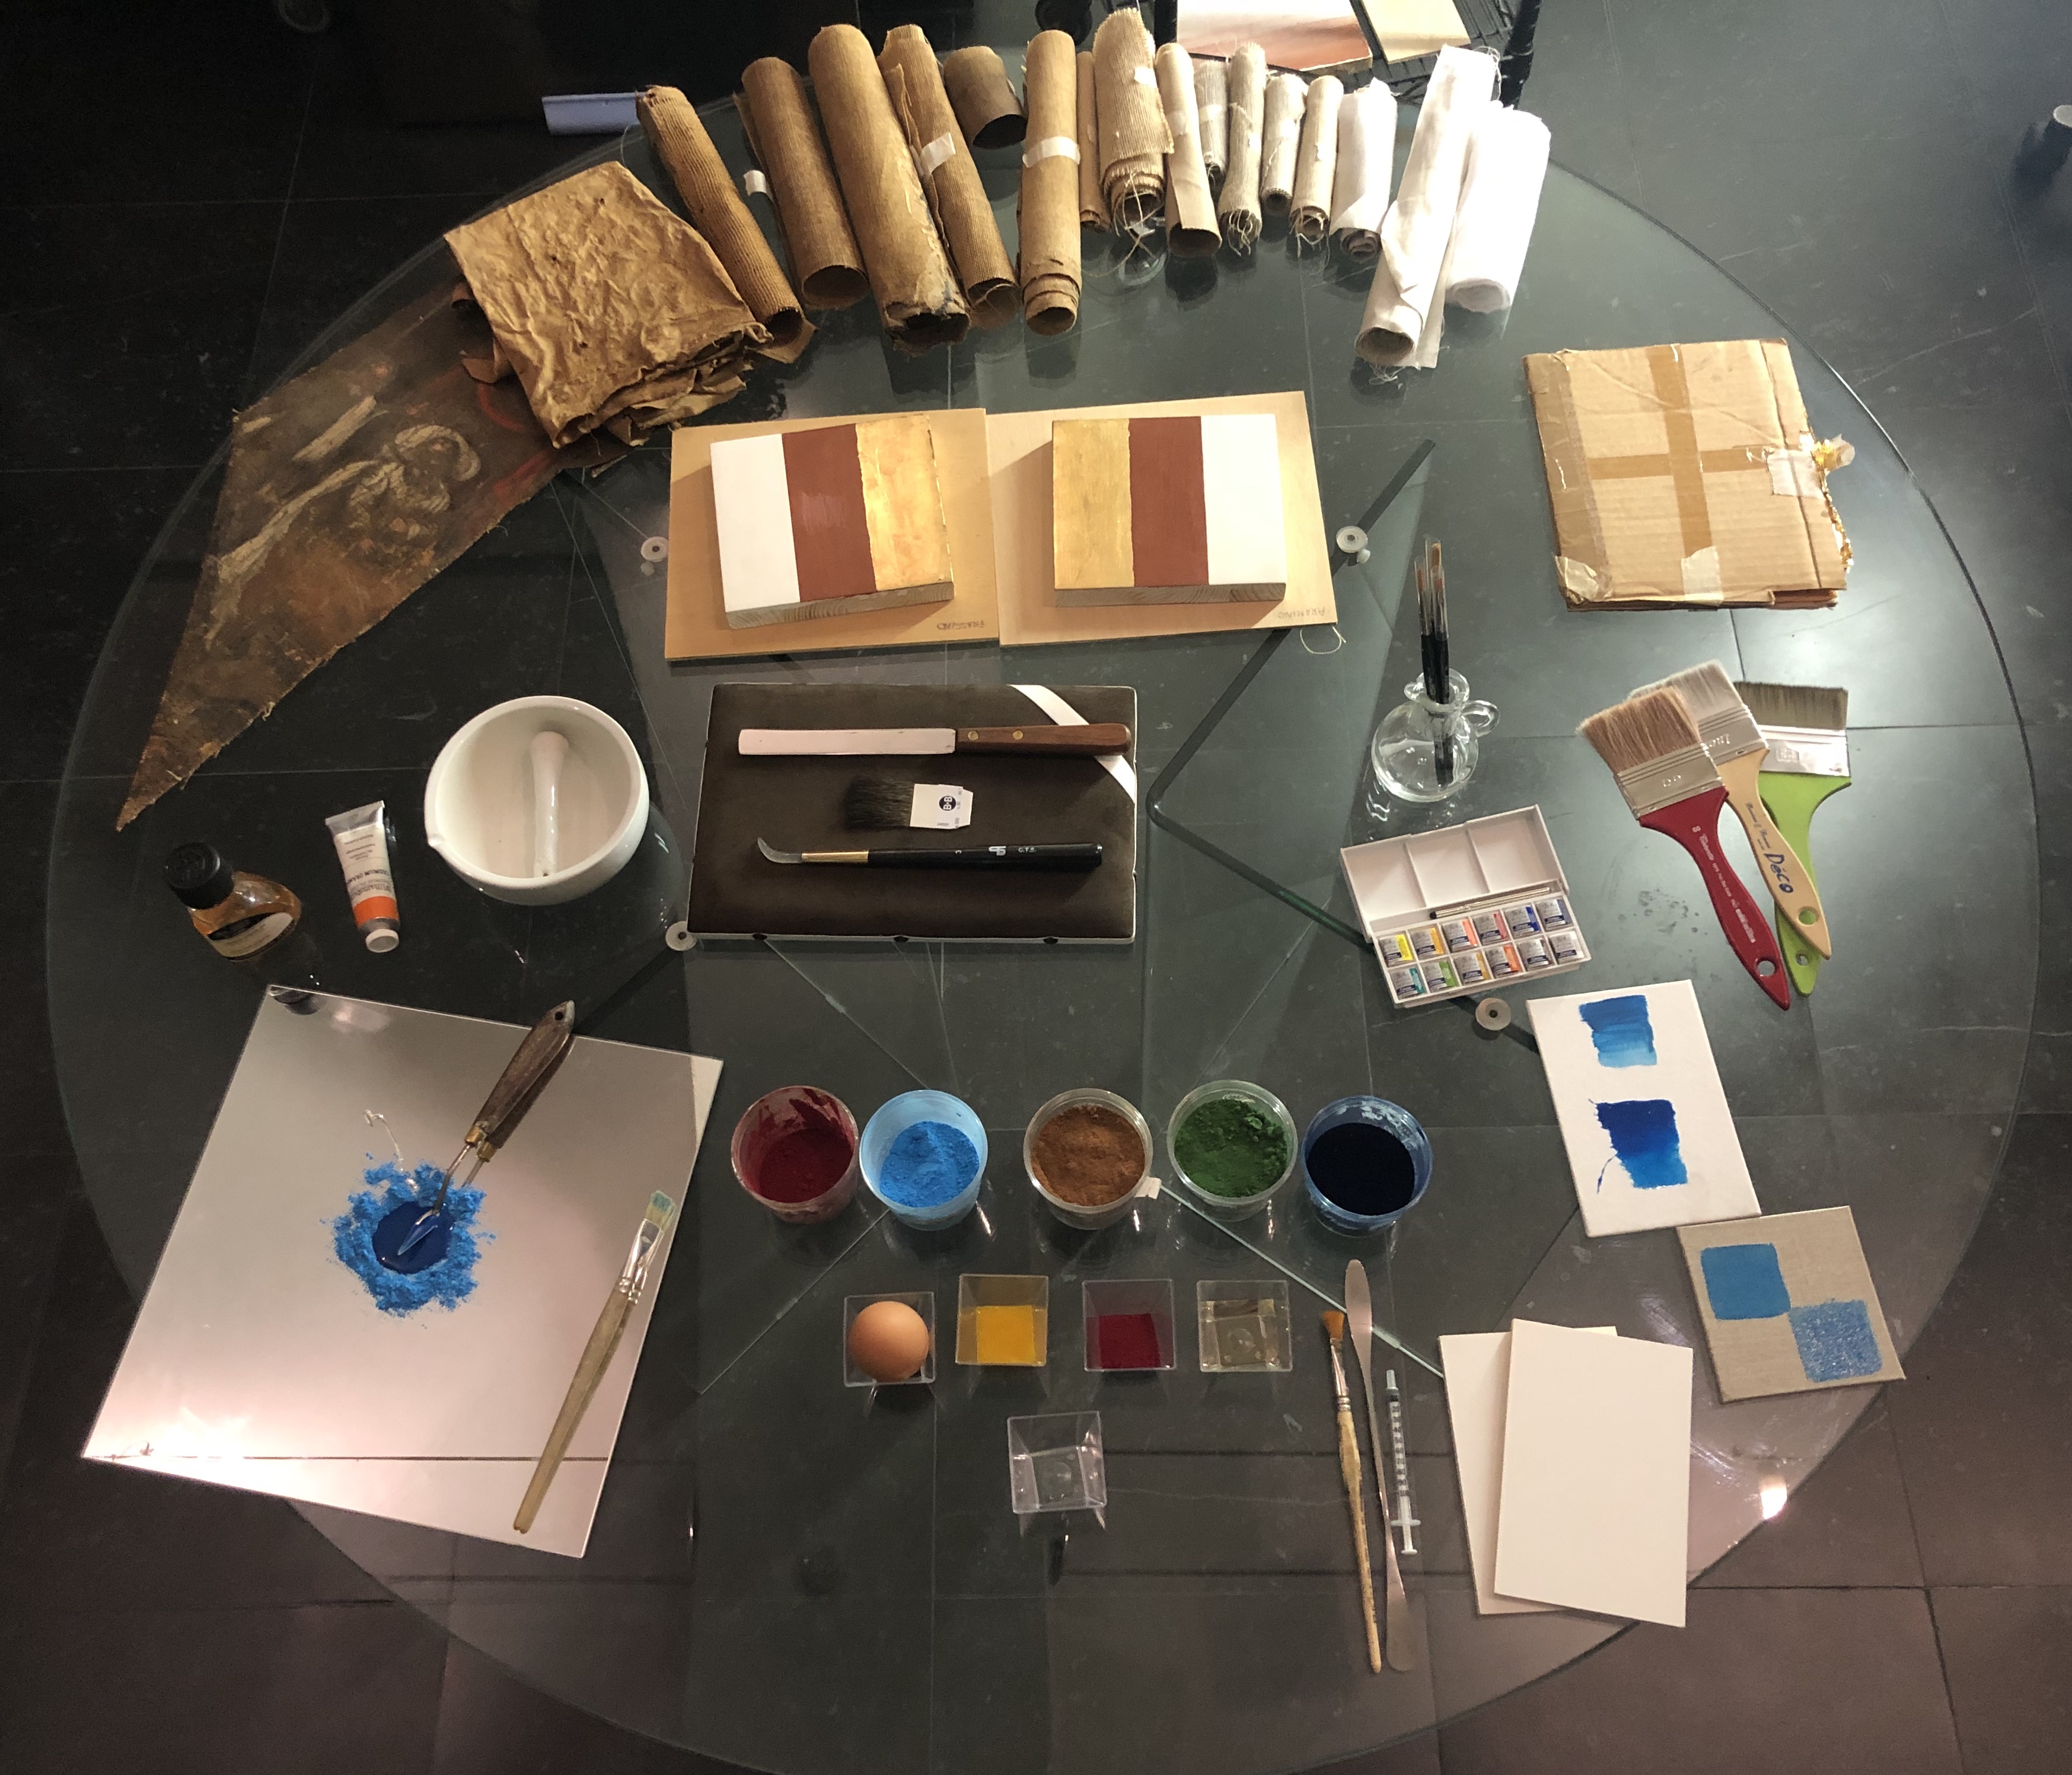 Table of materials to show our guests some of the old painting techniques